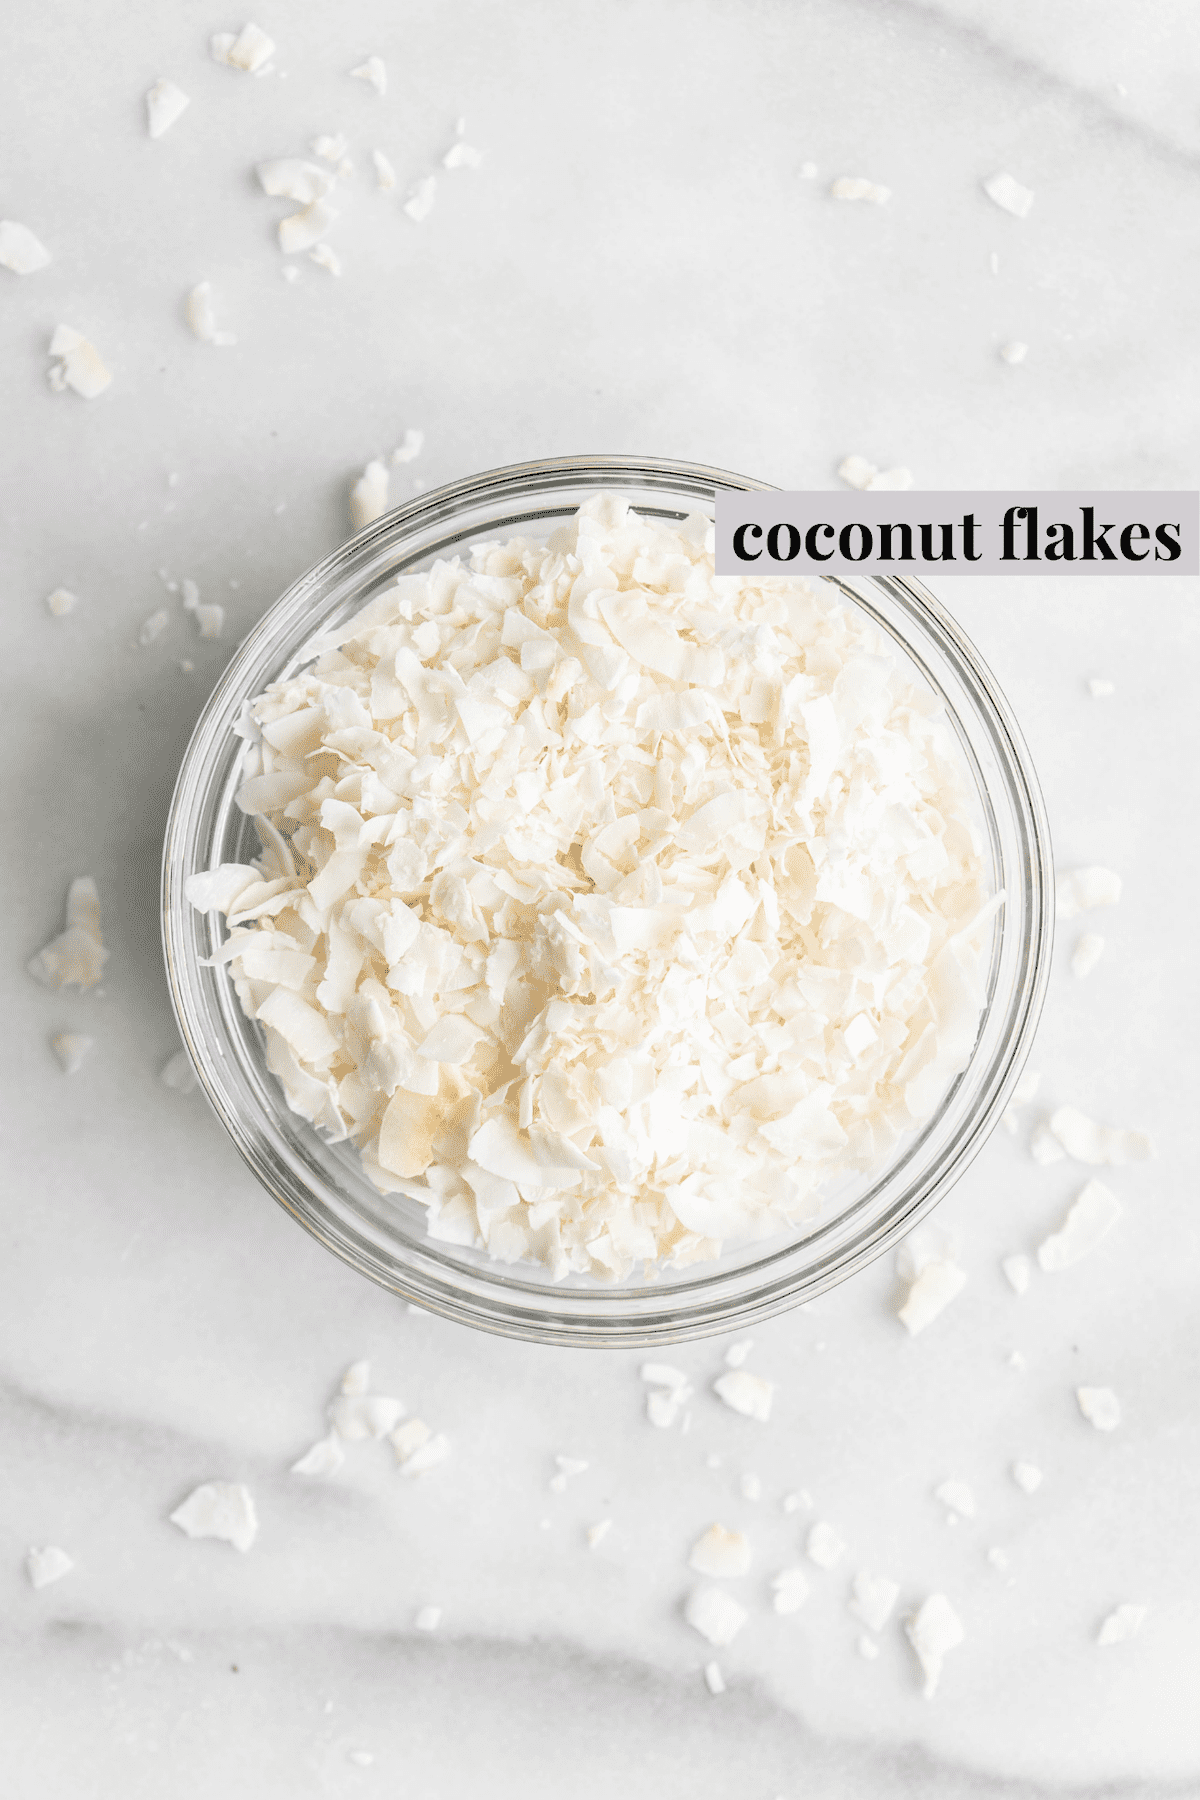 Overhead view of coconut flakes in jar